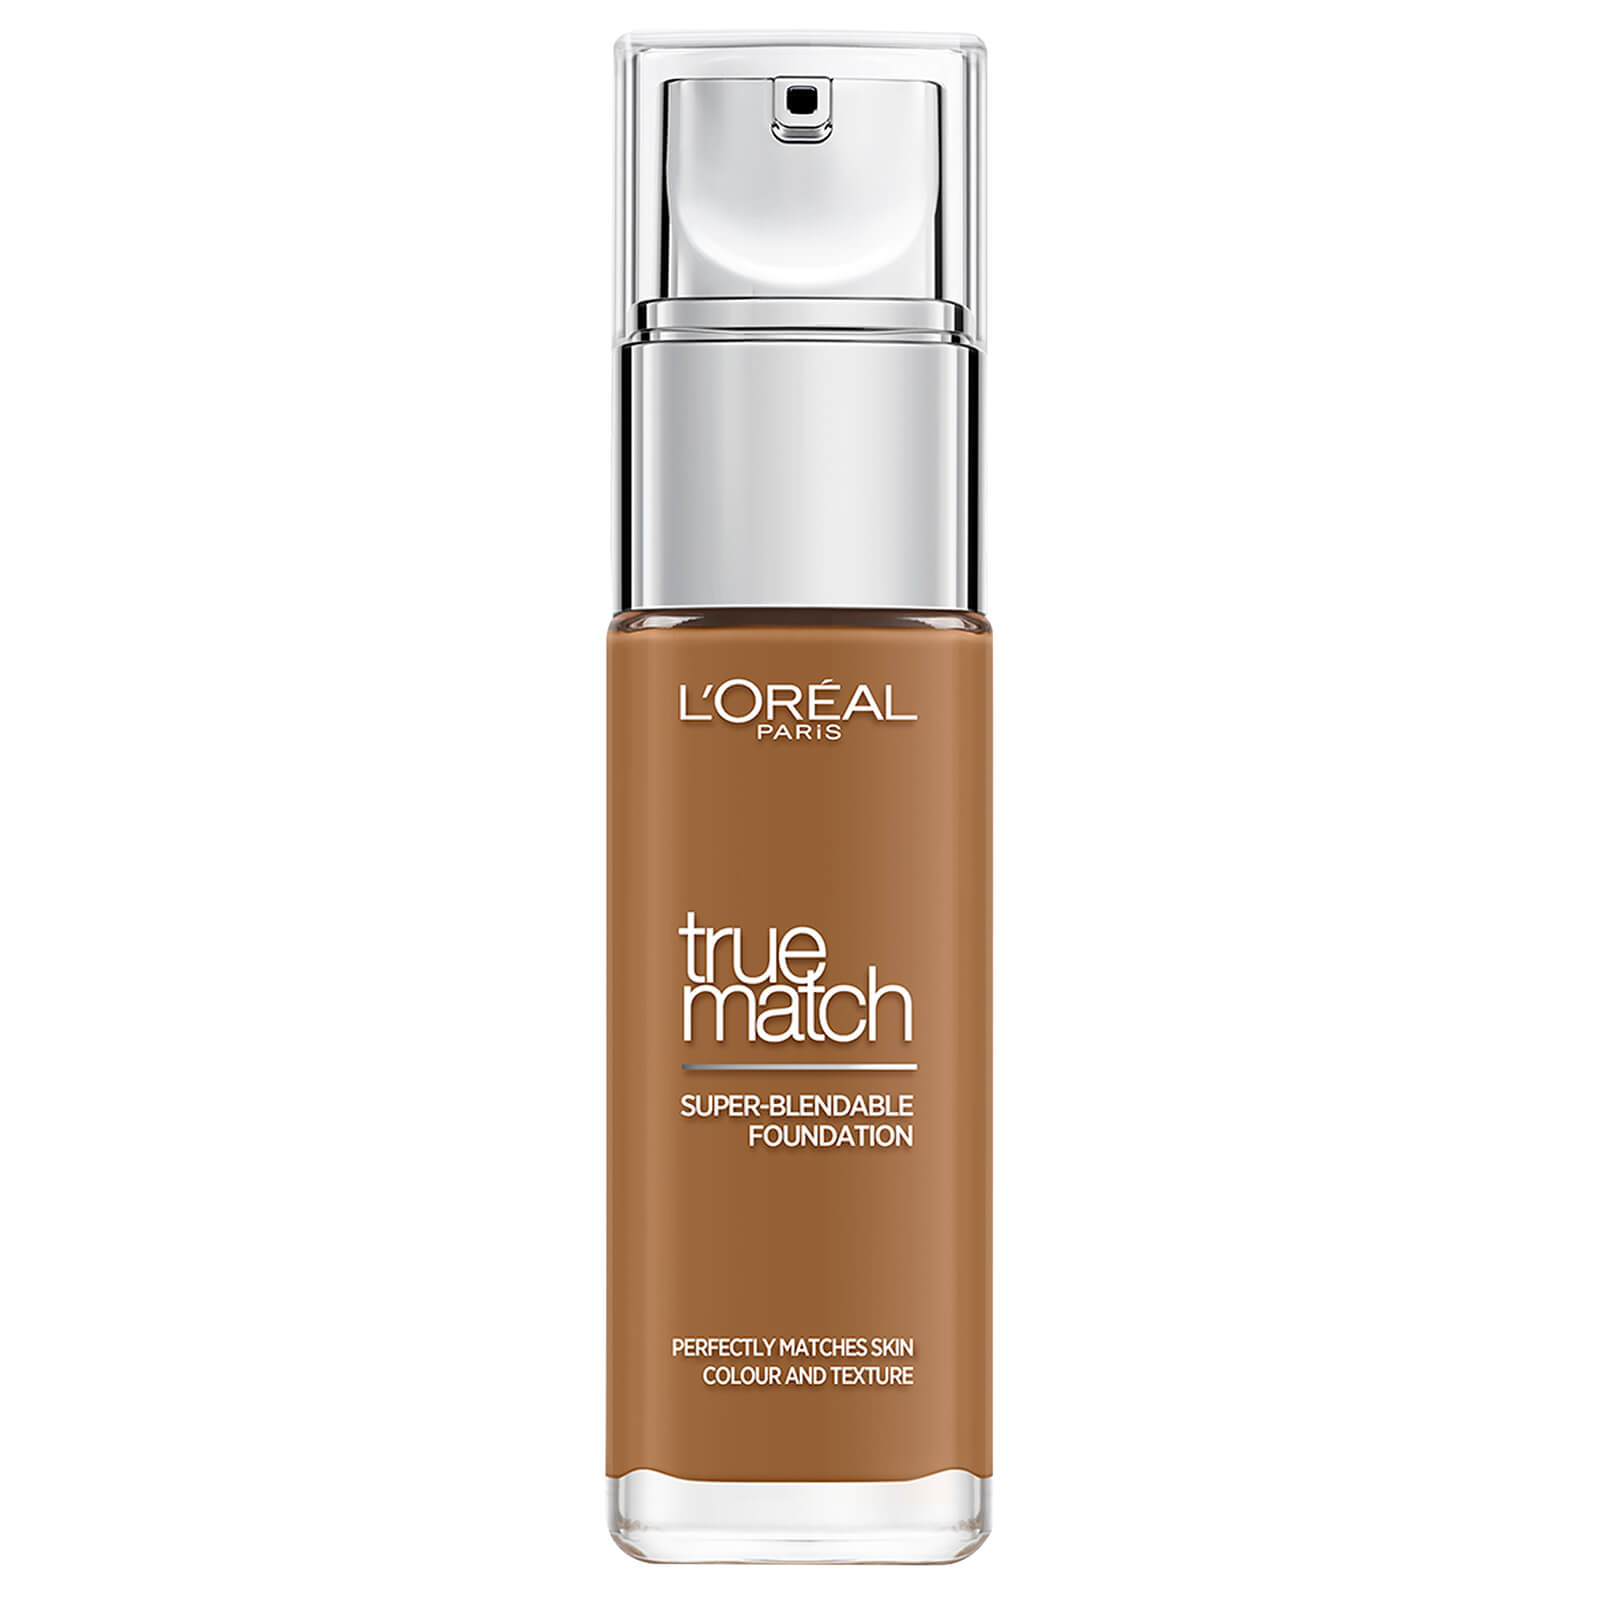 L'Oréal Paris True Match Liquid Foundation with SPF and Hyaluronic Acid 30ml (Various Shades) - 9N Truffle